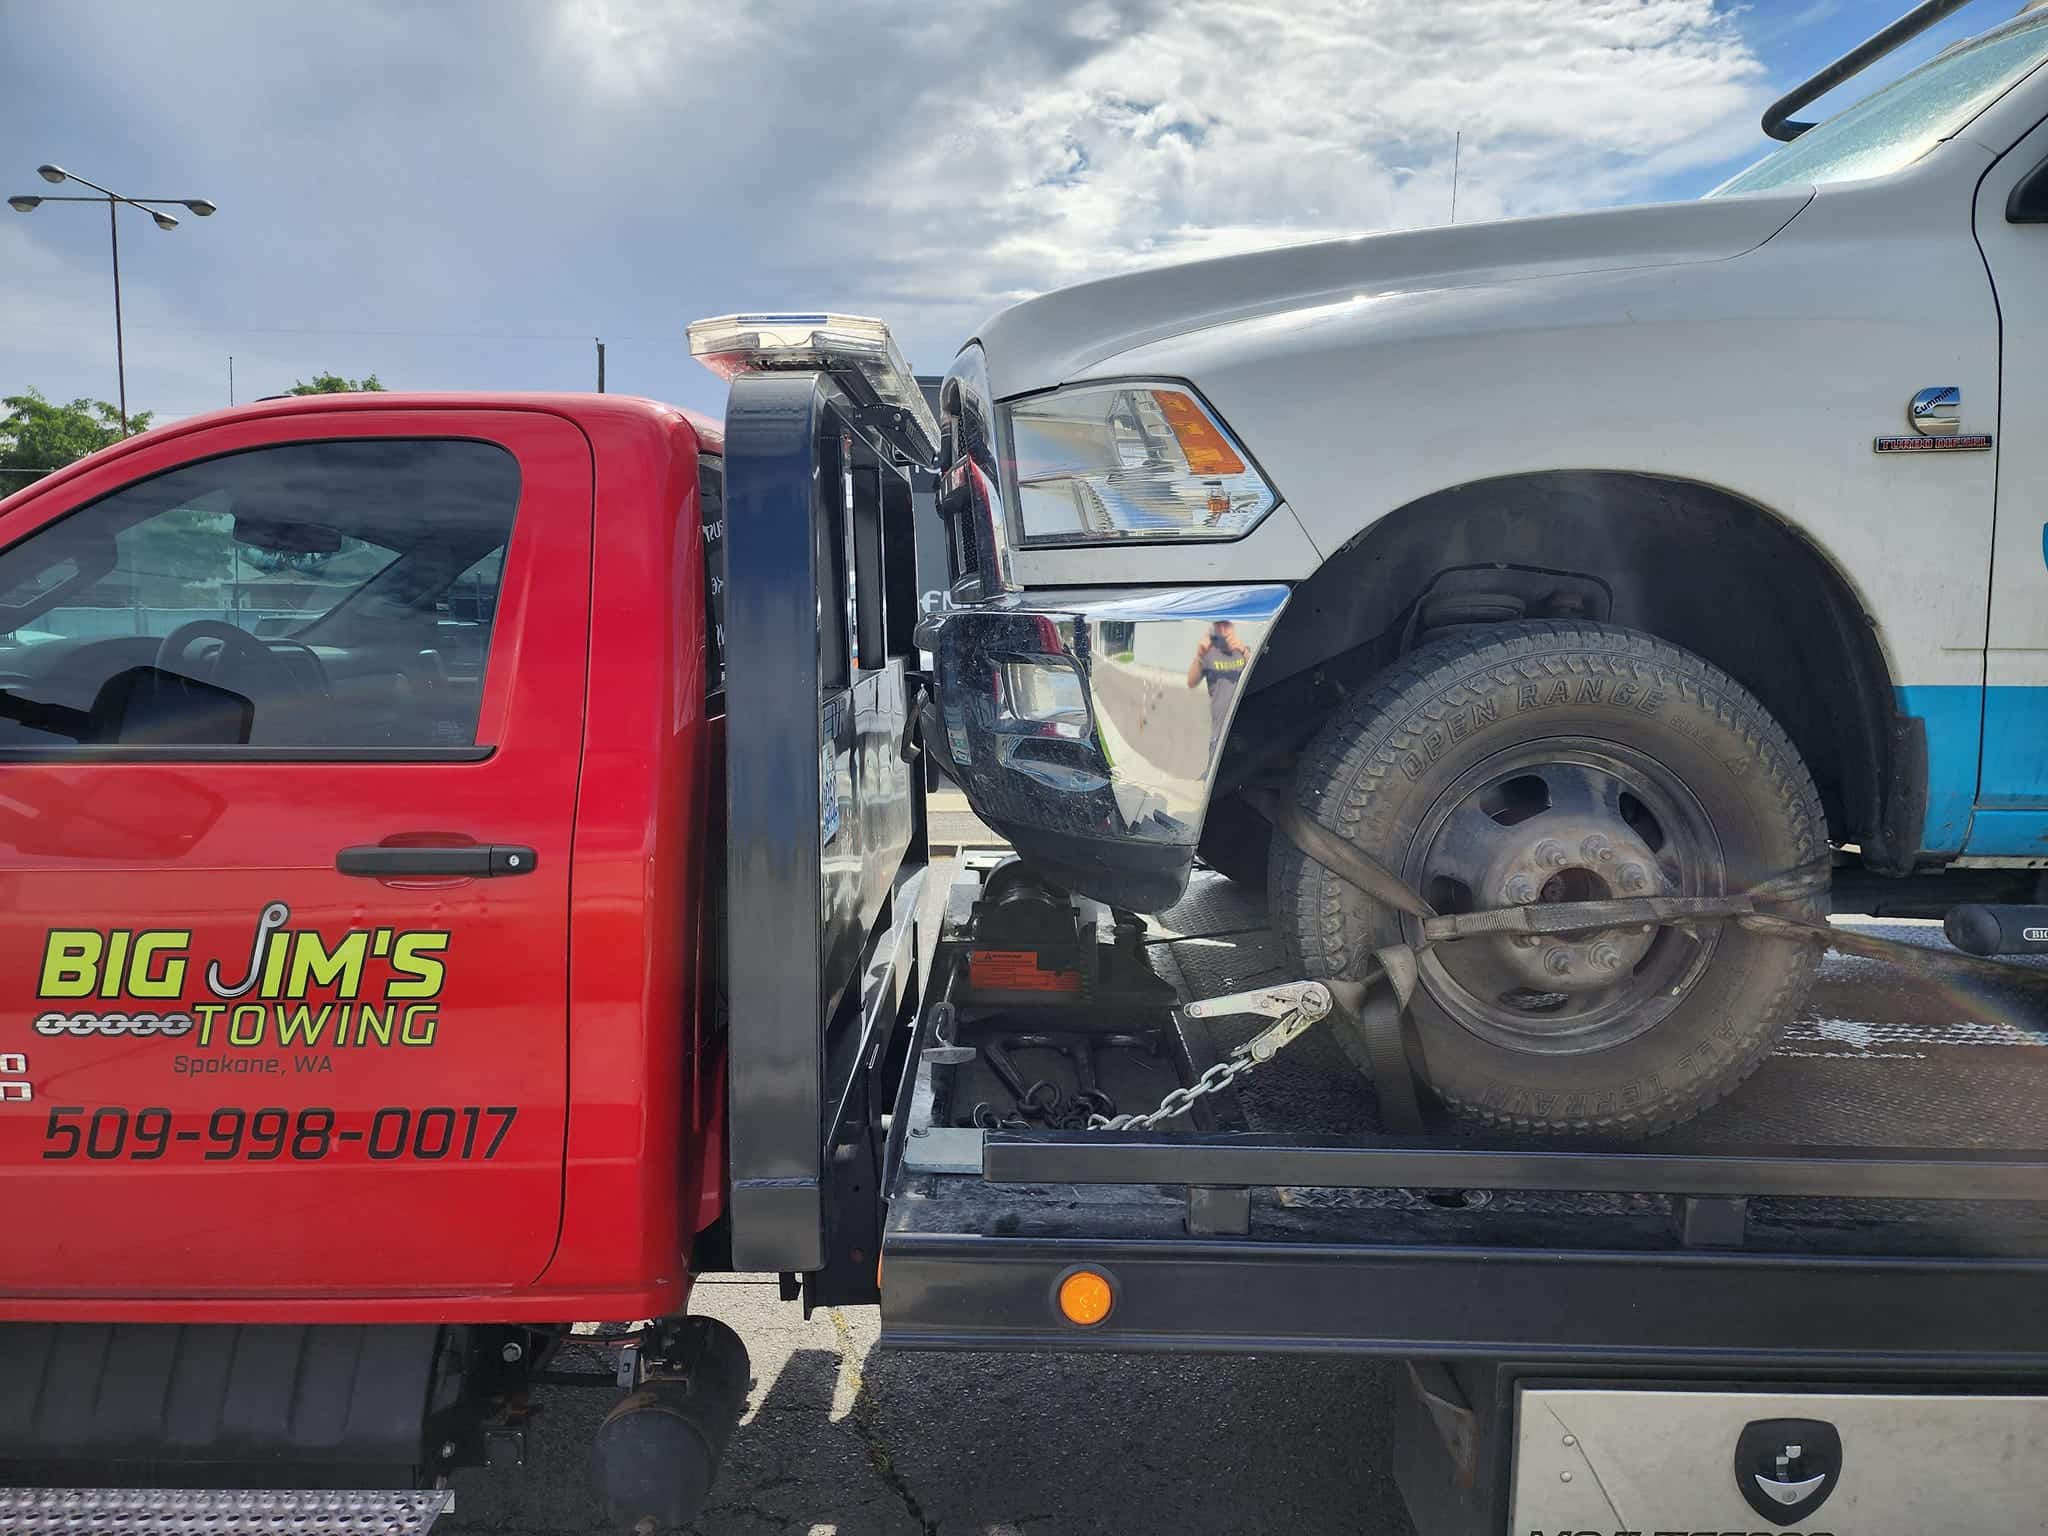 local towing tow truck from Big Jim's Towing